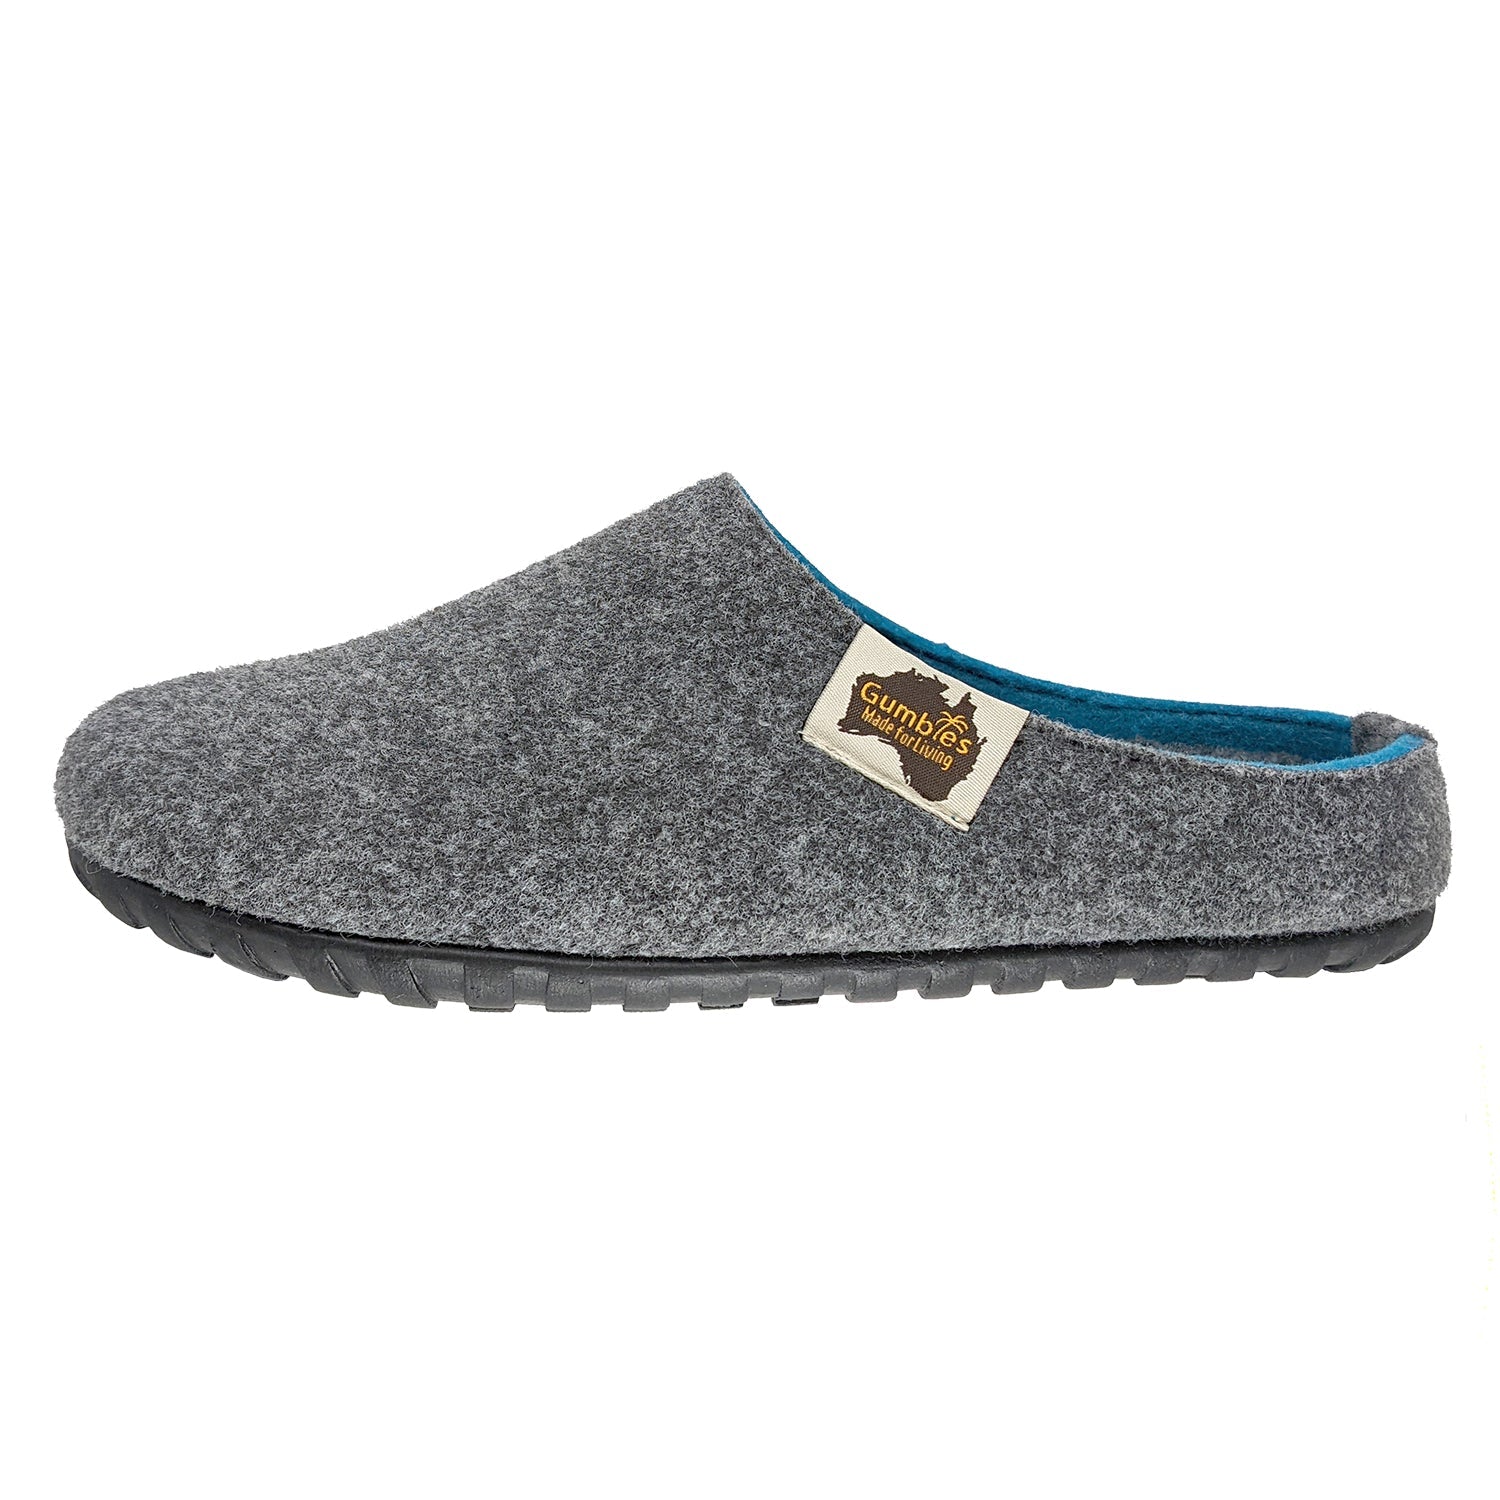 Outback - Women's - Grey & Turquoise